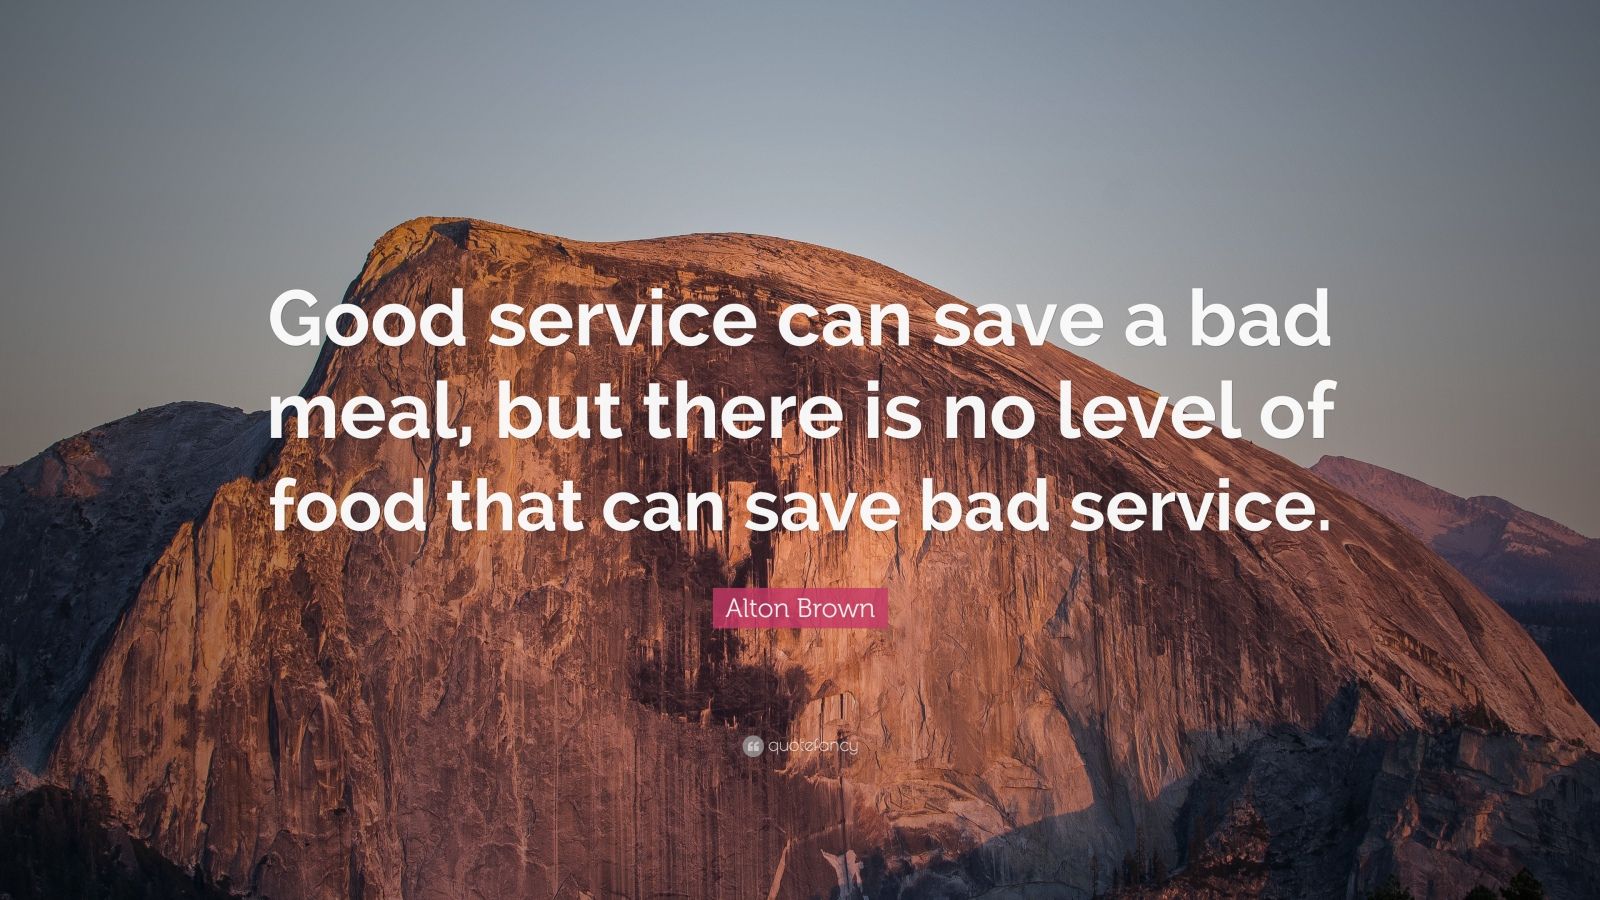 Alton Brown Quote: “Good service can save a bad meal, but there is no